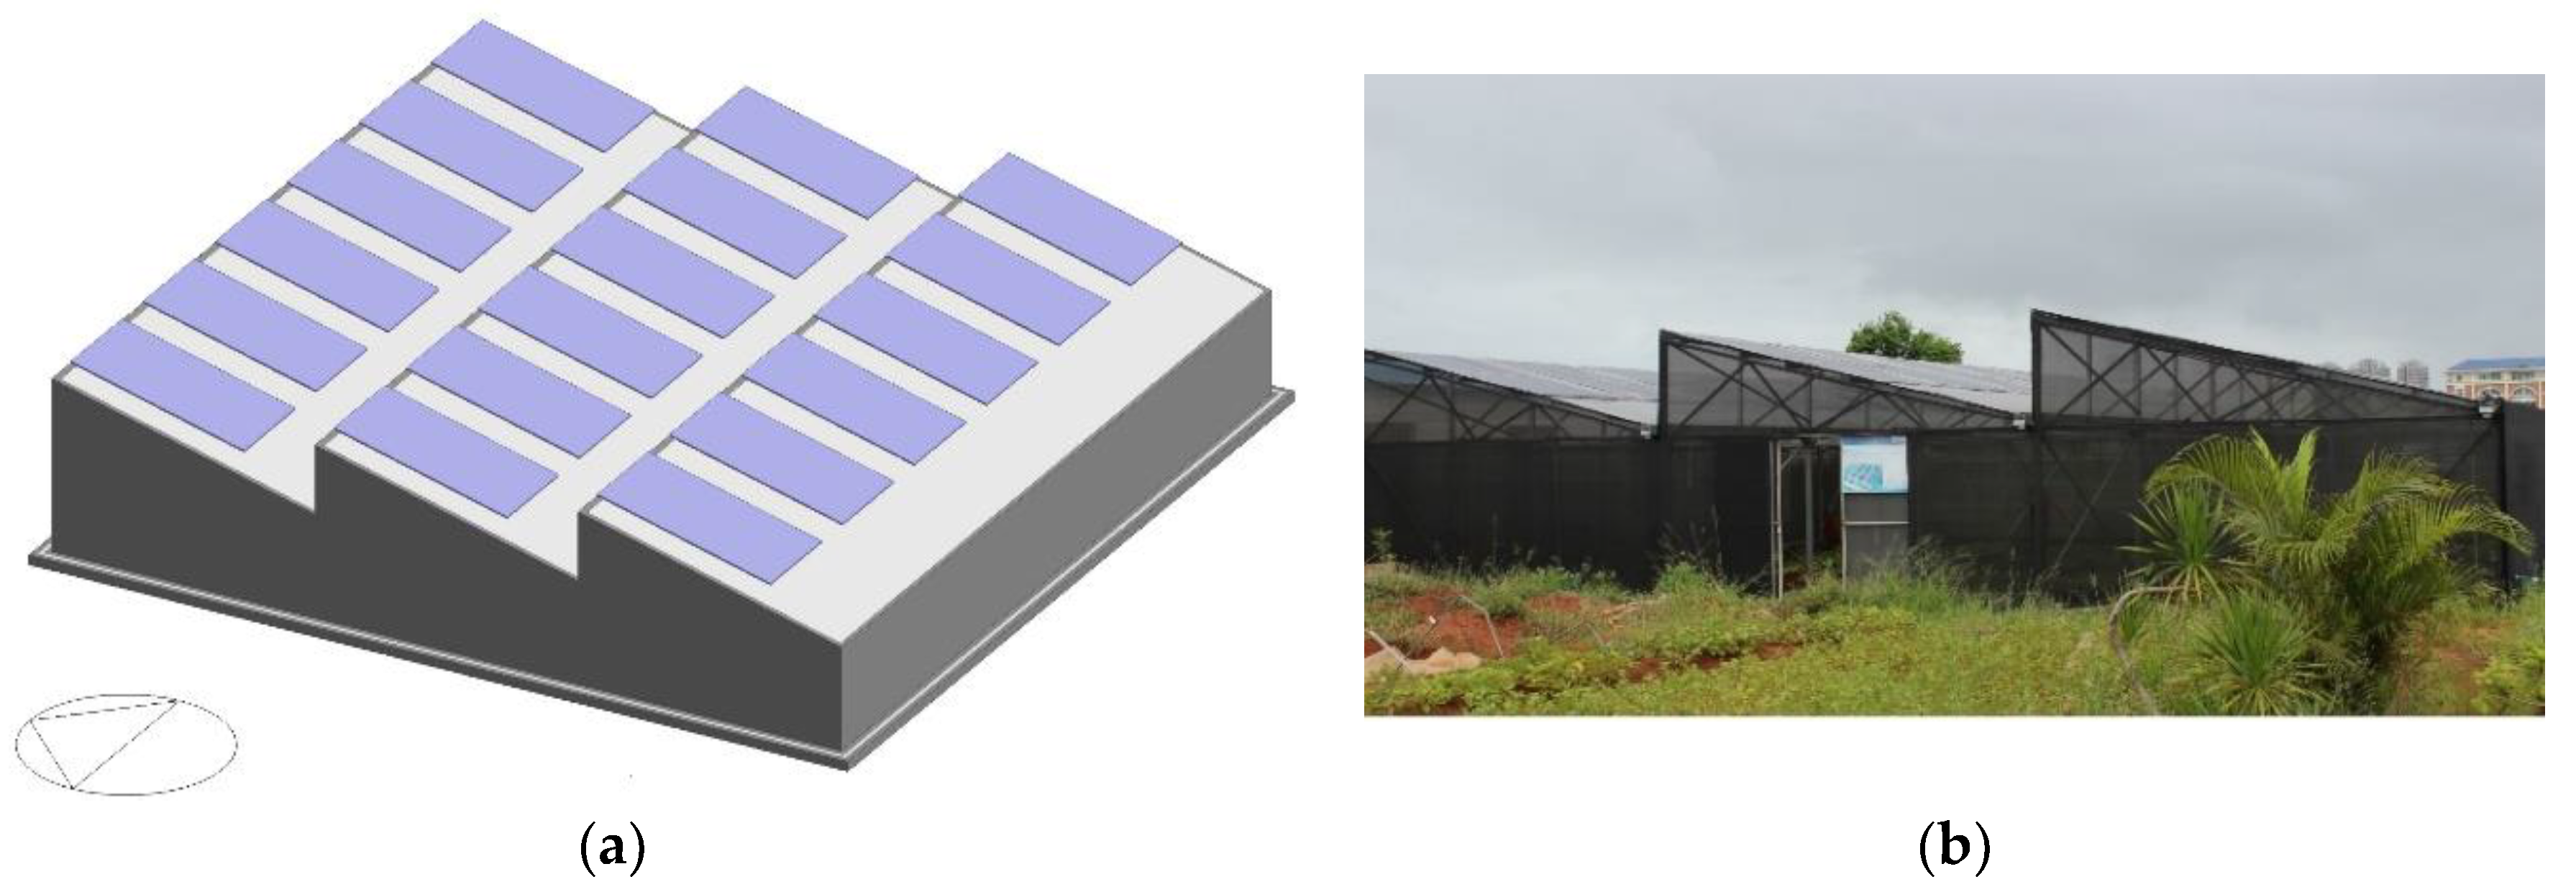 Applied Sciences | Free Full-Text | Simulation and Experimental Study of  Light and Thermal Environment of Photovoltaic Greenhouse in Tropical Area  Based on Design Builder